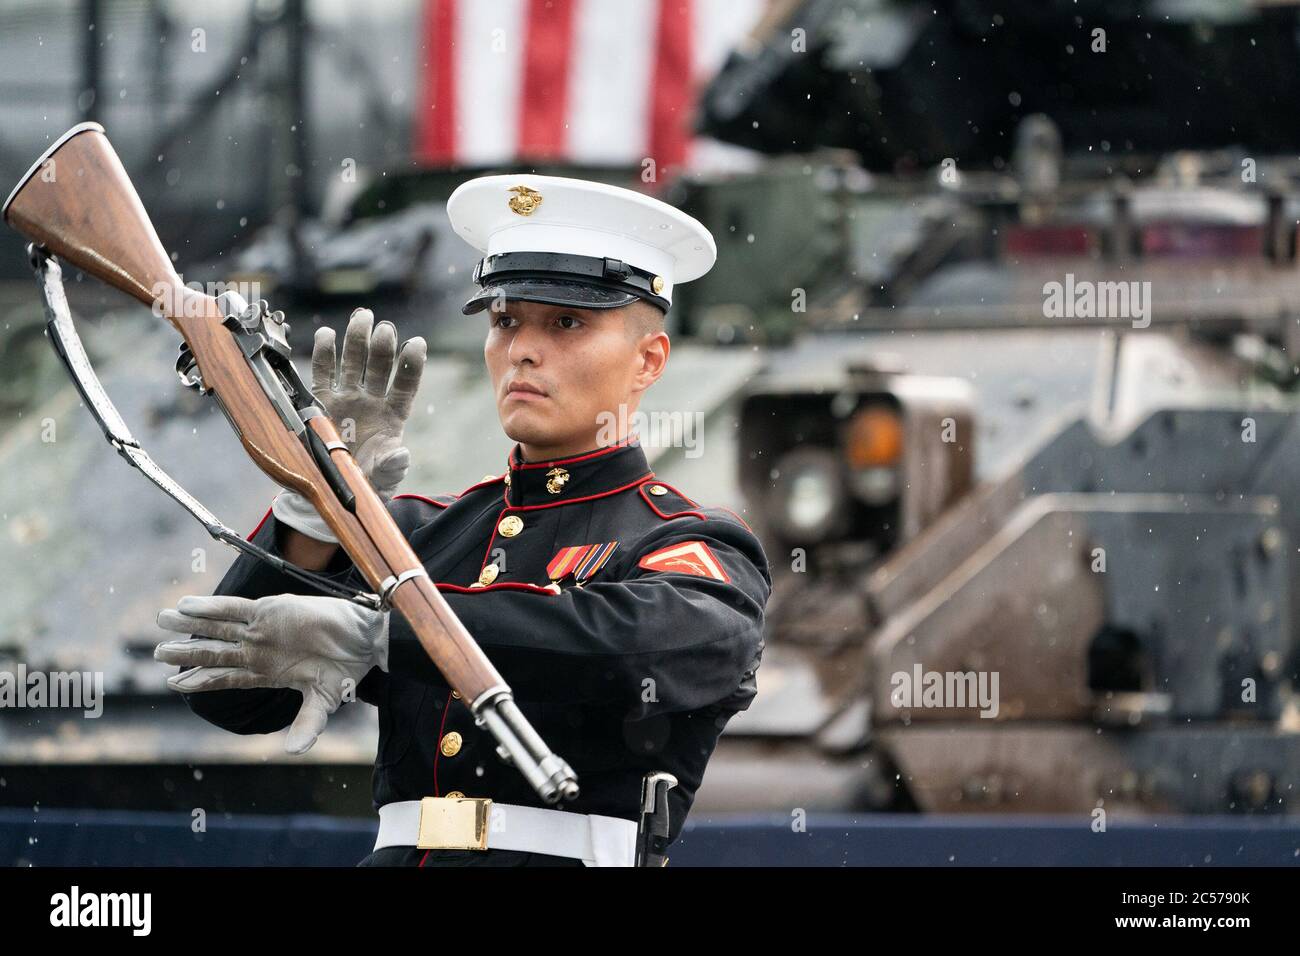 Washington, United States Of America. 04th July, 2019. A member of the U.S. Marine Corps Silent Drill Platoon marches in formation and performs at the Salute to America event Thursday, July 4, 2019, at the Lincoln Memorial in Washington, DC People: President Donald Trump Credit: Storms Media Group/Alamy Live News Stock Photo